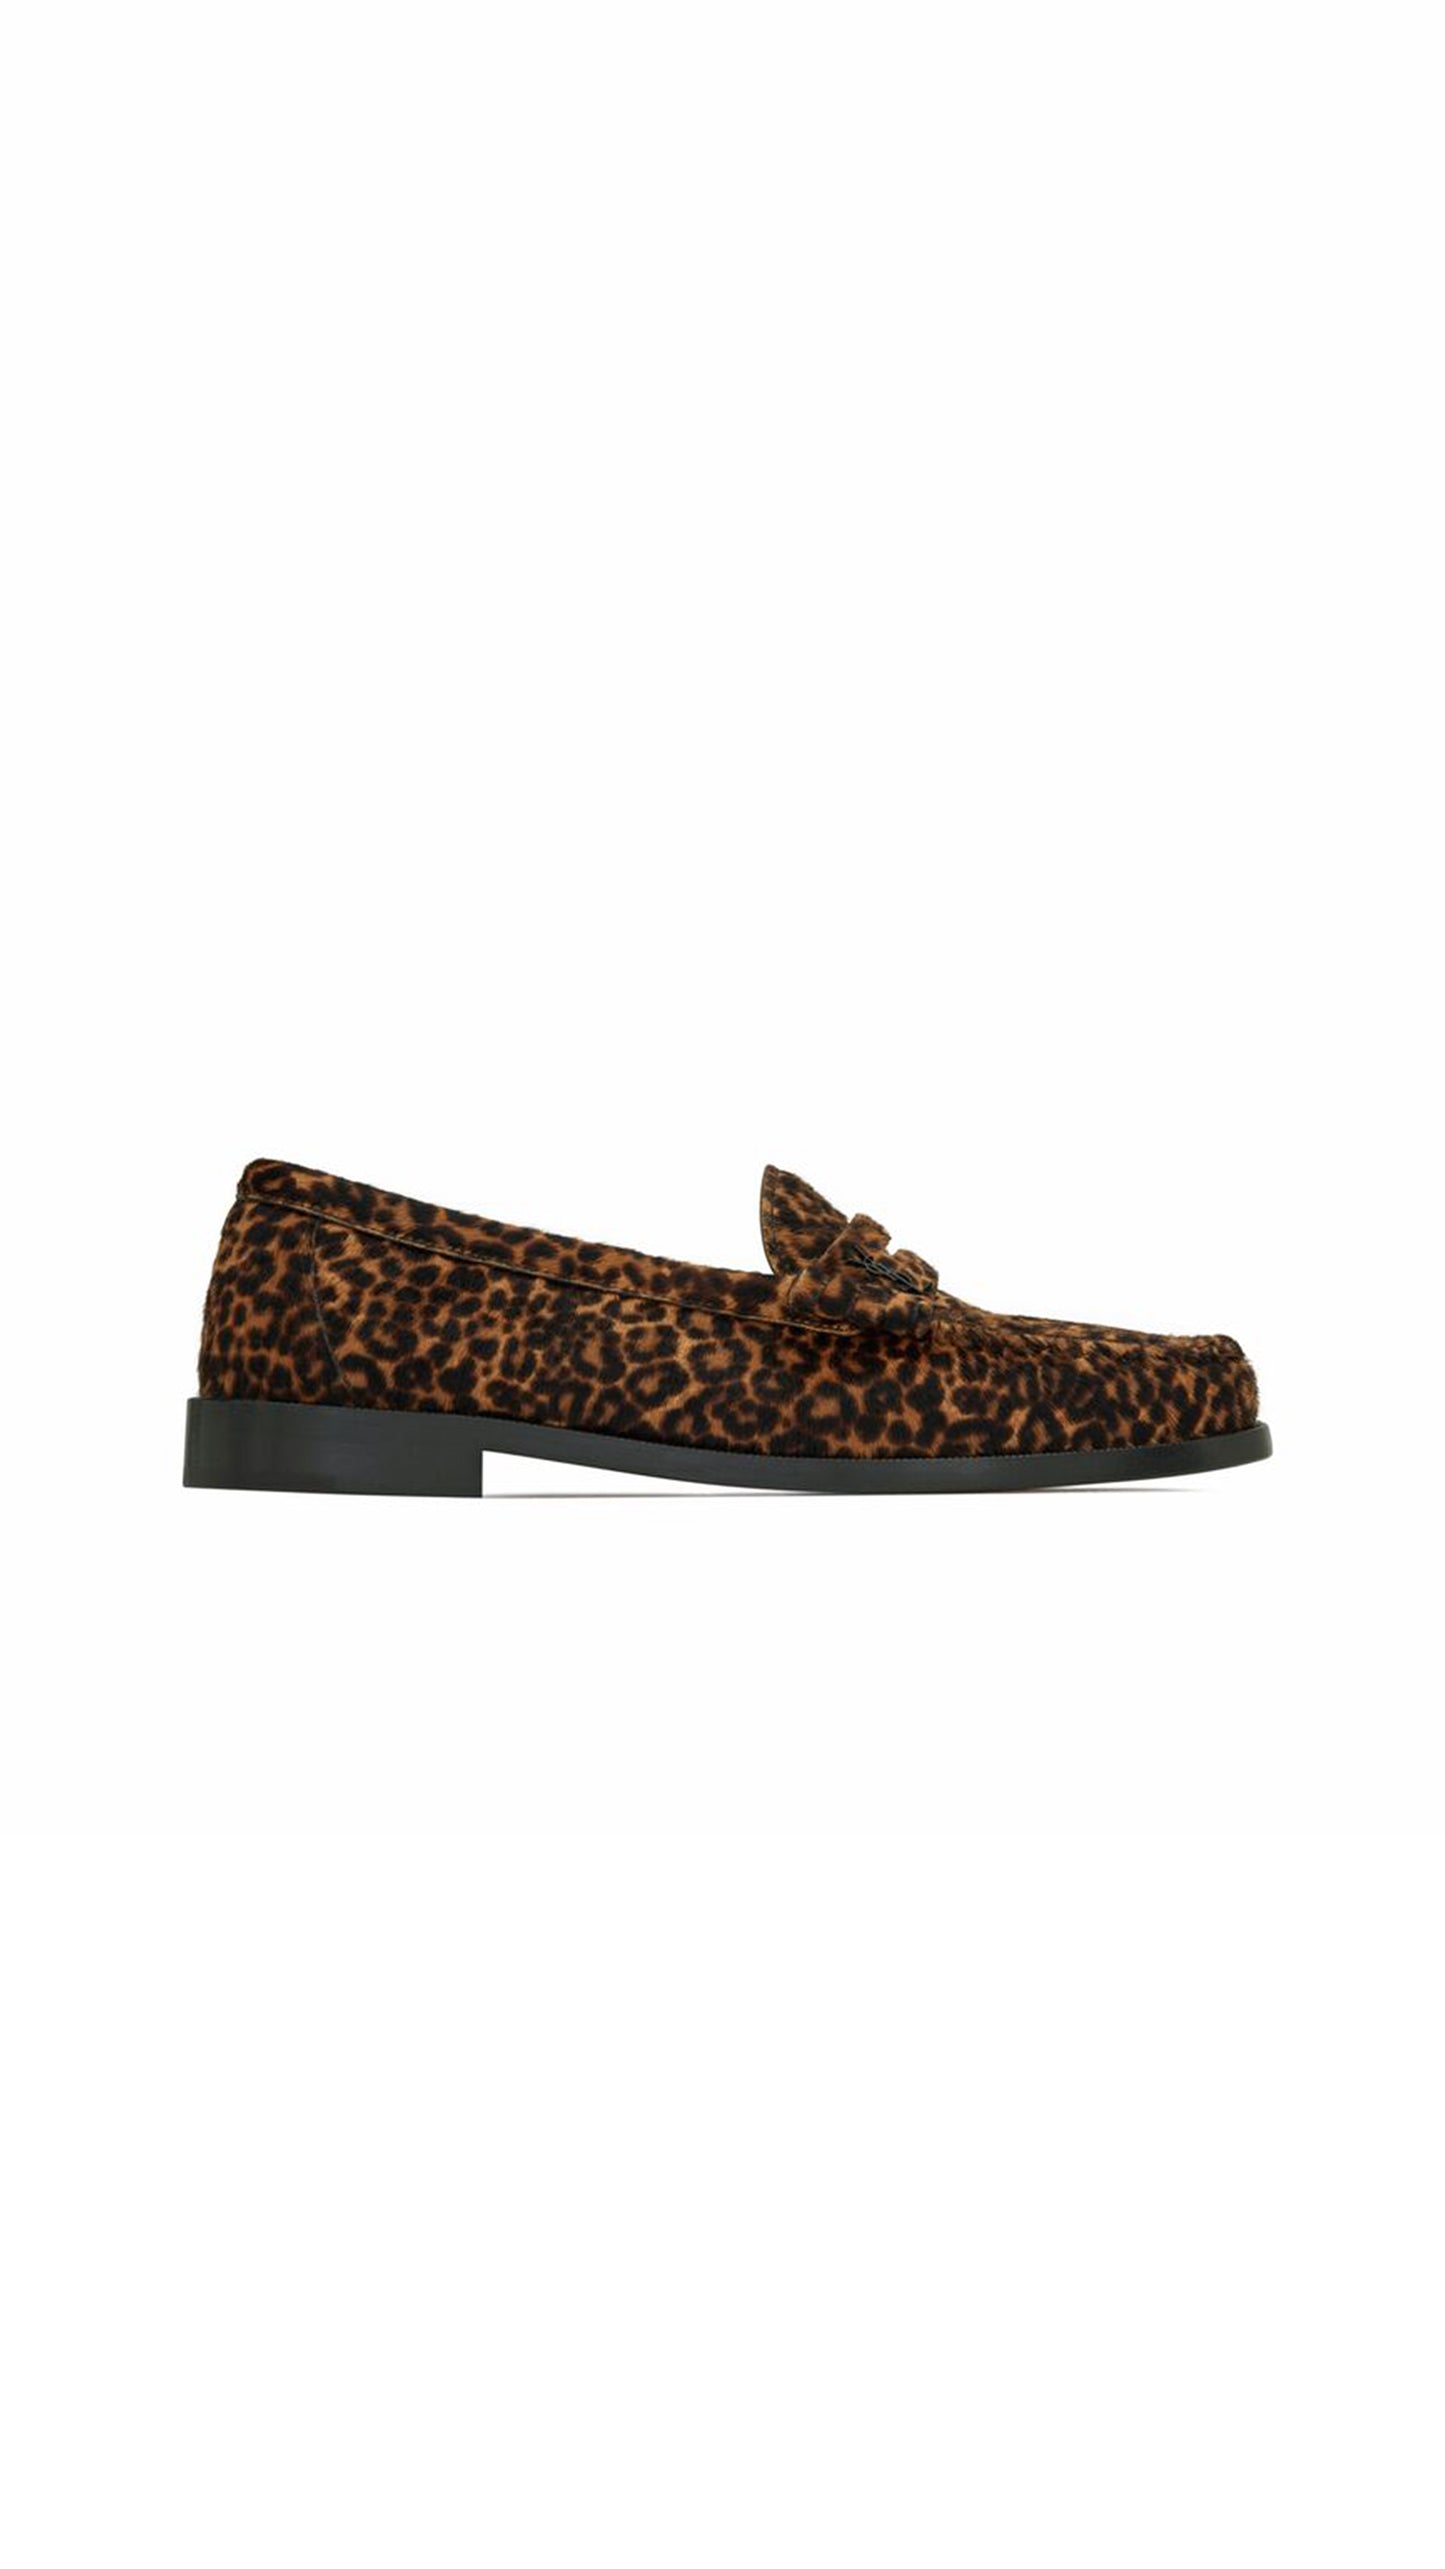 Le Loafer Monogram Penny Slippers in Leopard-Print Pony-Effect Leather